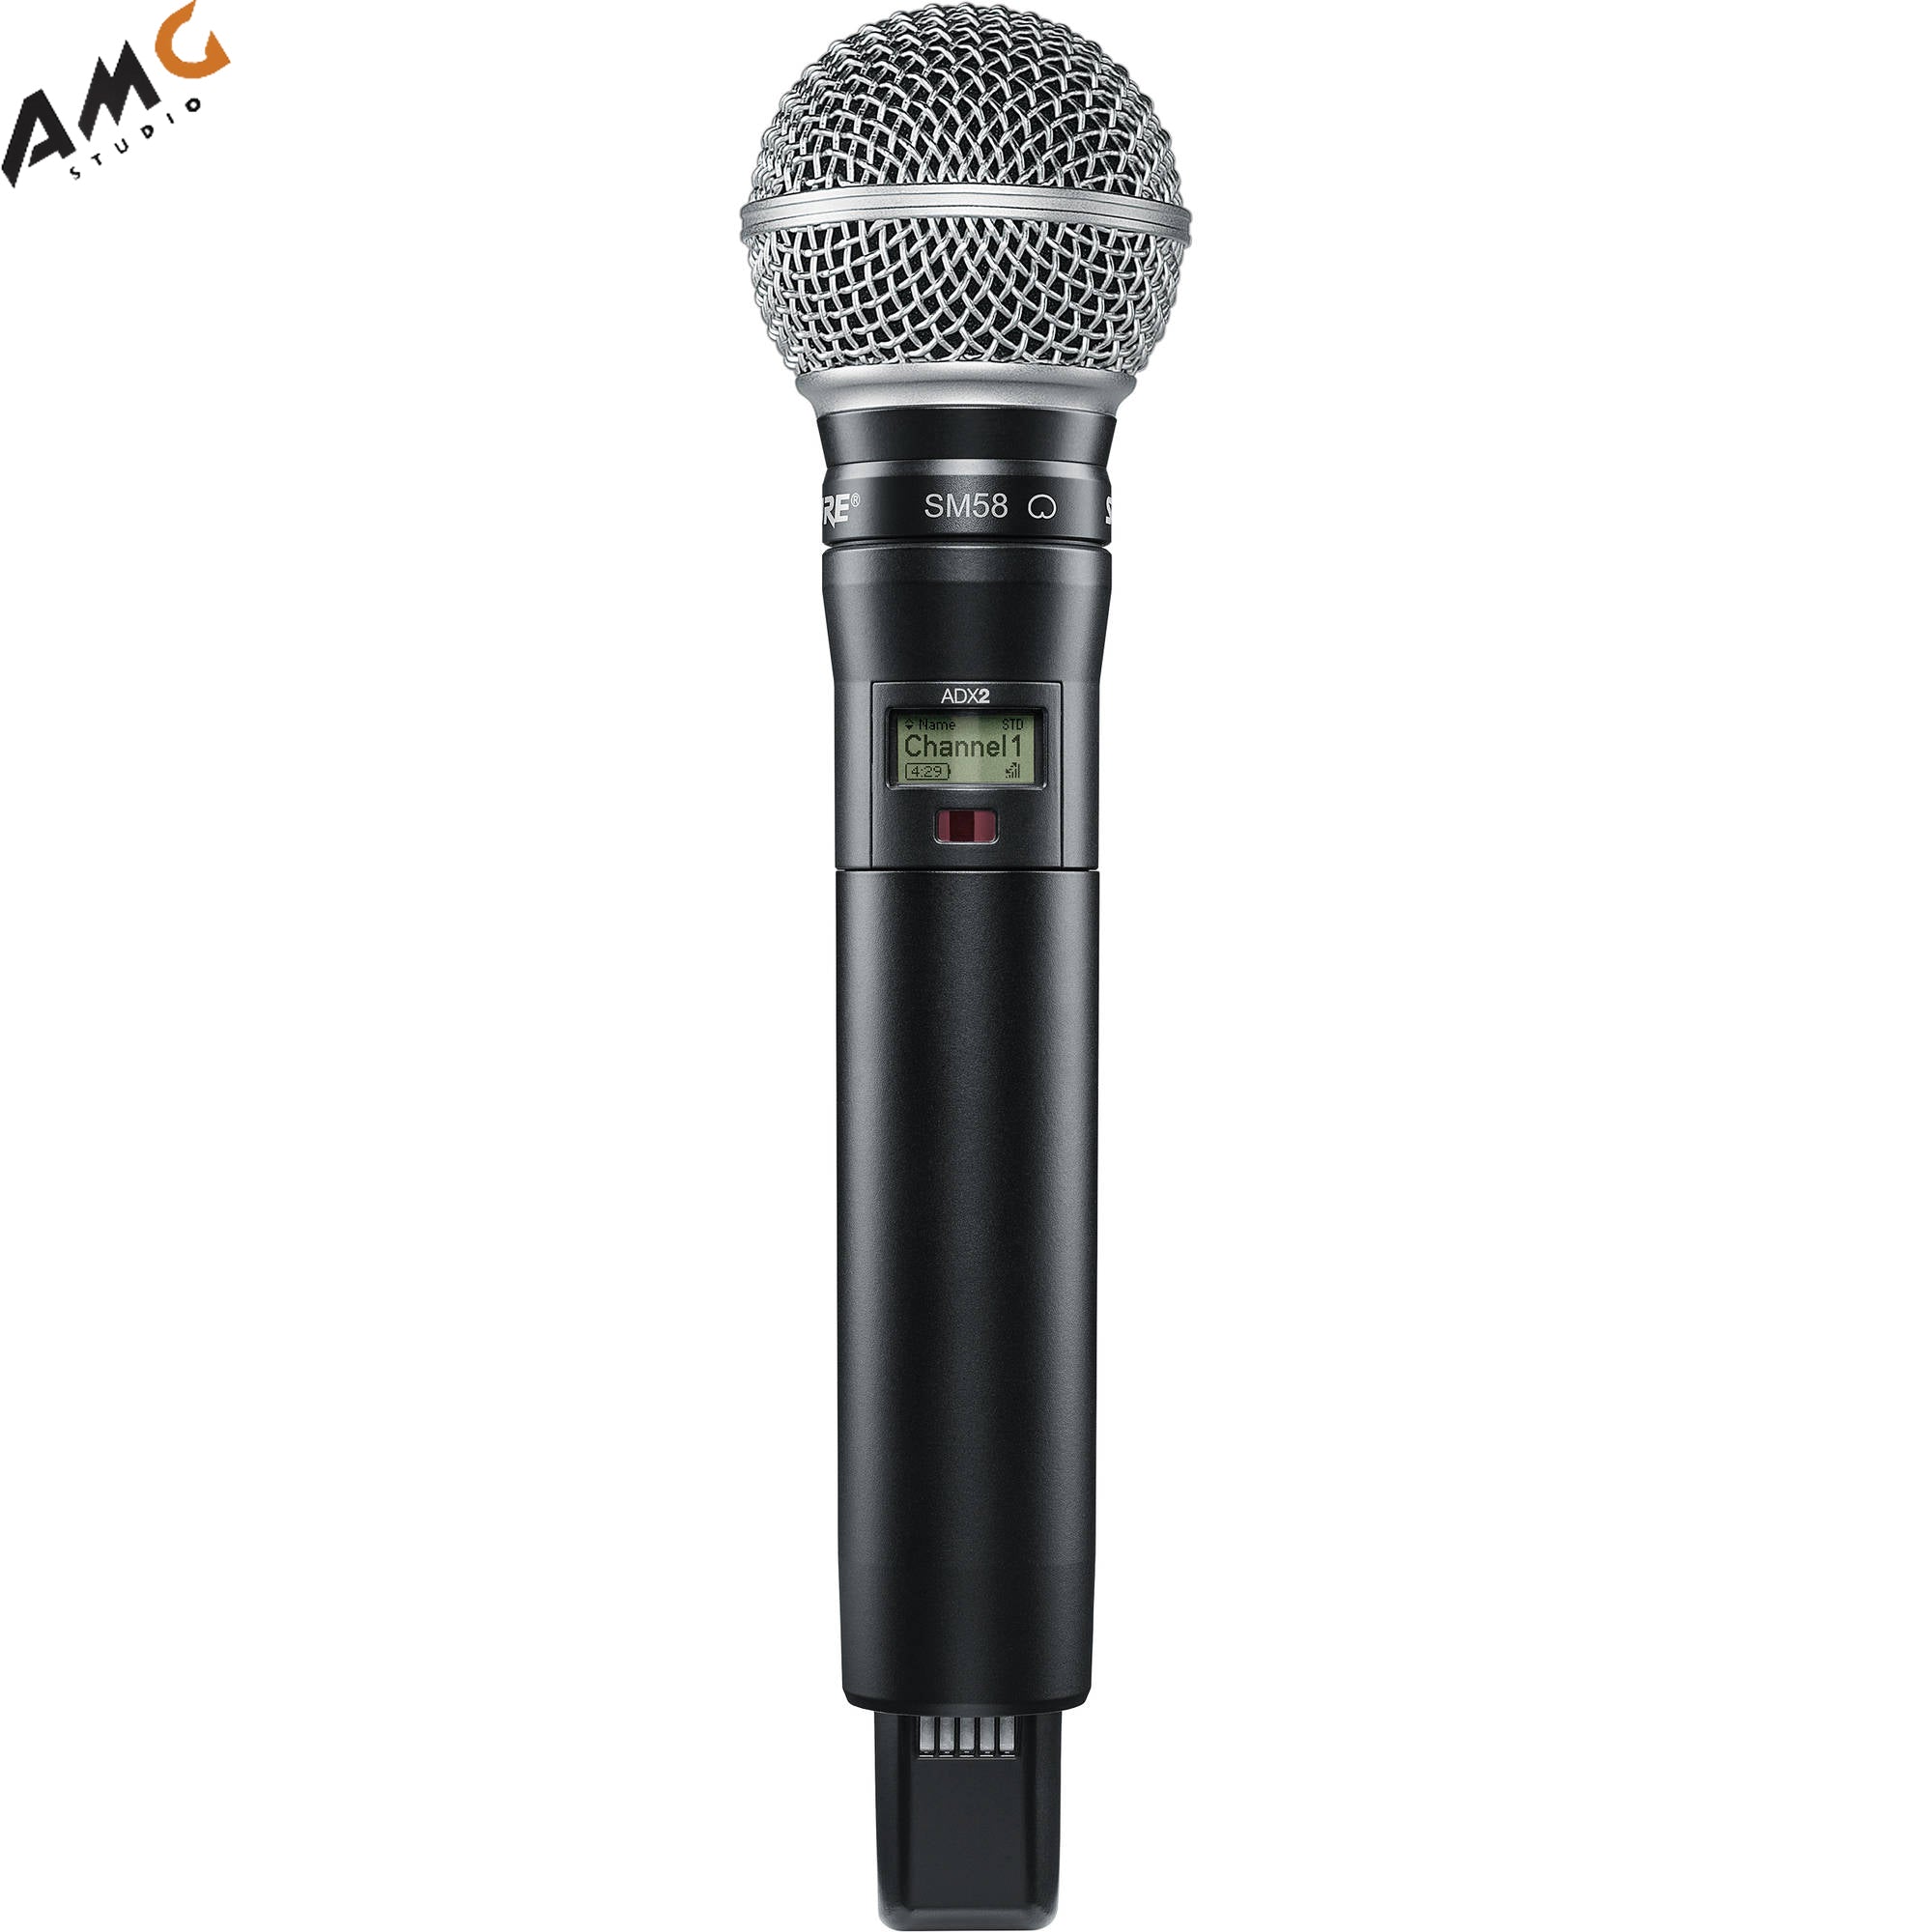 Shure ADX2/SM58 Digital Handheld Wireless Microphone Transmitter with SM58 Capsule (G57: 470 to 616 MHz) - Studio AMG